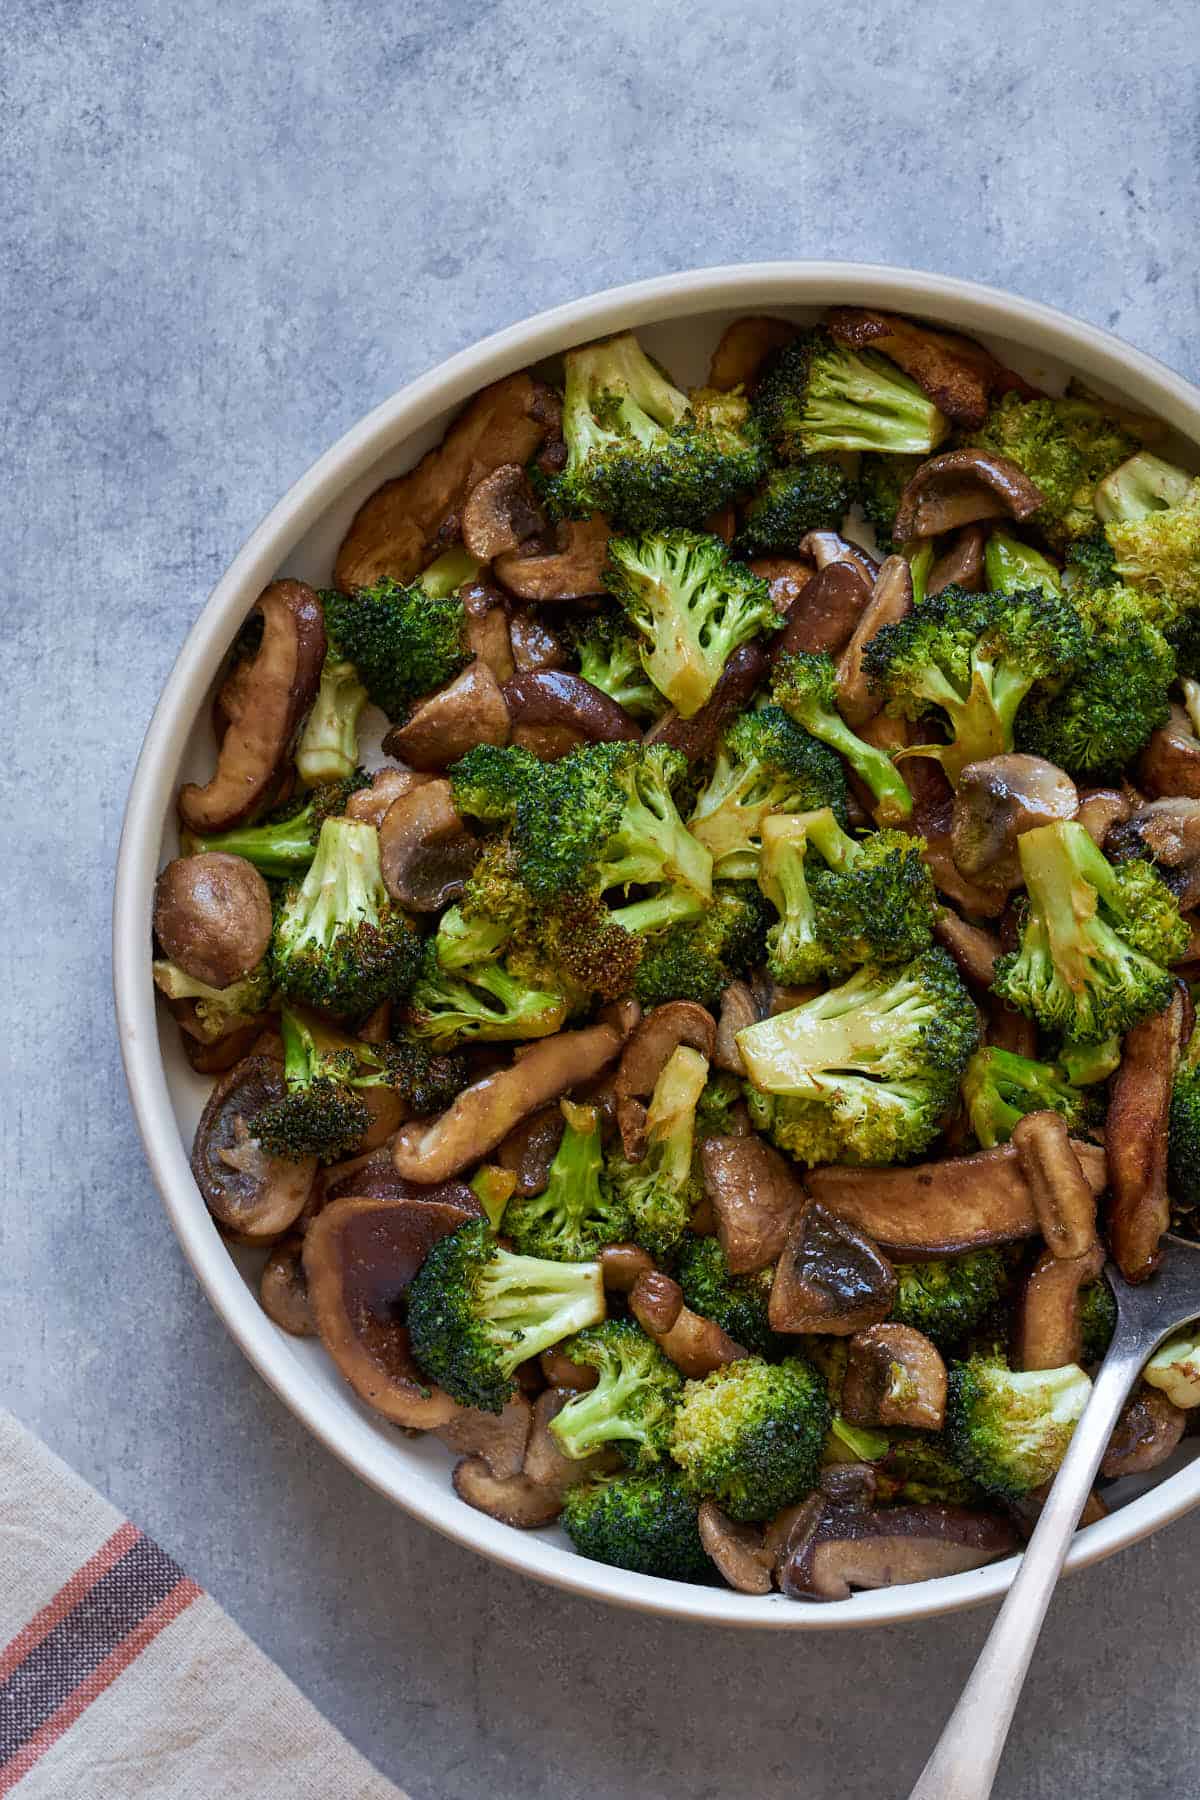 Air fryer broccoli and mushrooms in a bowl.